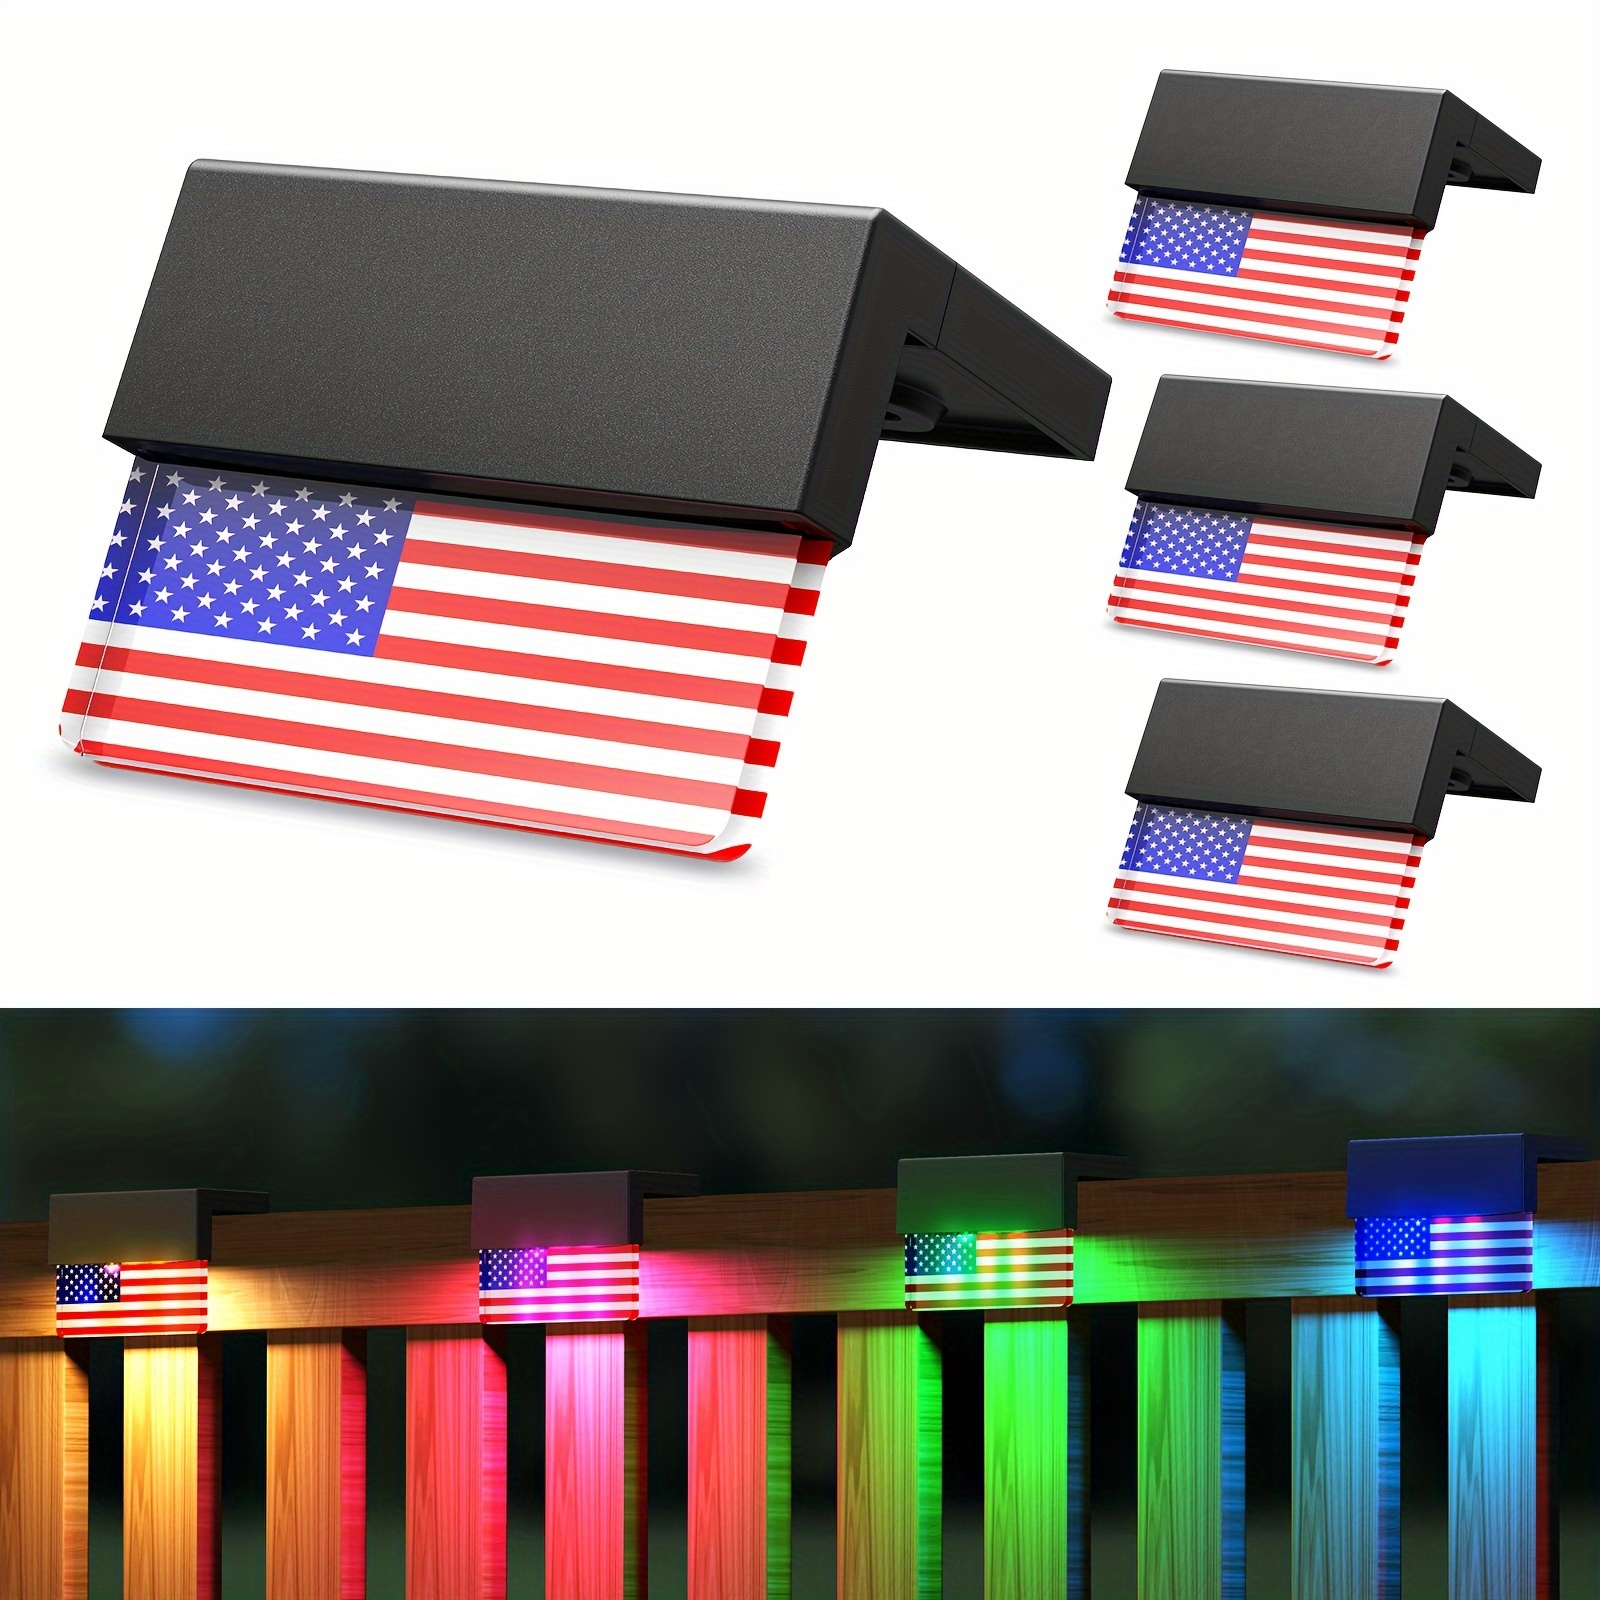 

4th Of July Decorations Solar Fence Lights, 6 Pack American Flag Solar Lights Outdoor For Fence With Rgb & Warm White Mode, Deck Fence Lights Solar Powered For Patriotic Decor And Holiday Decoration